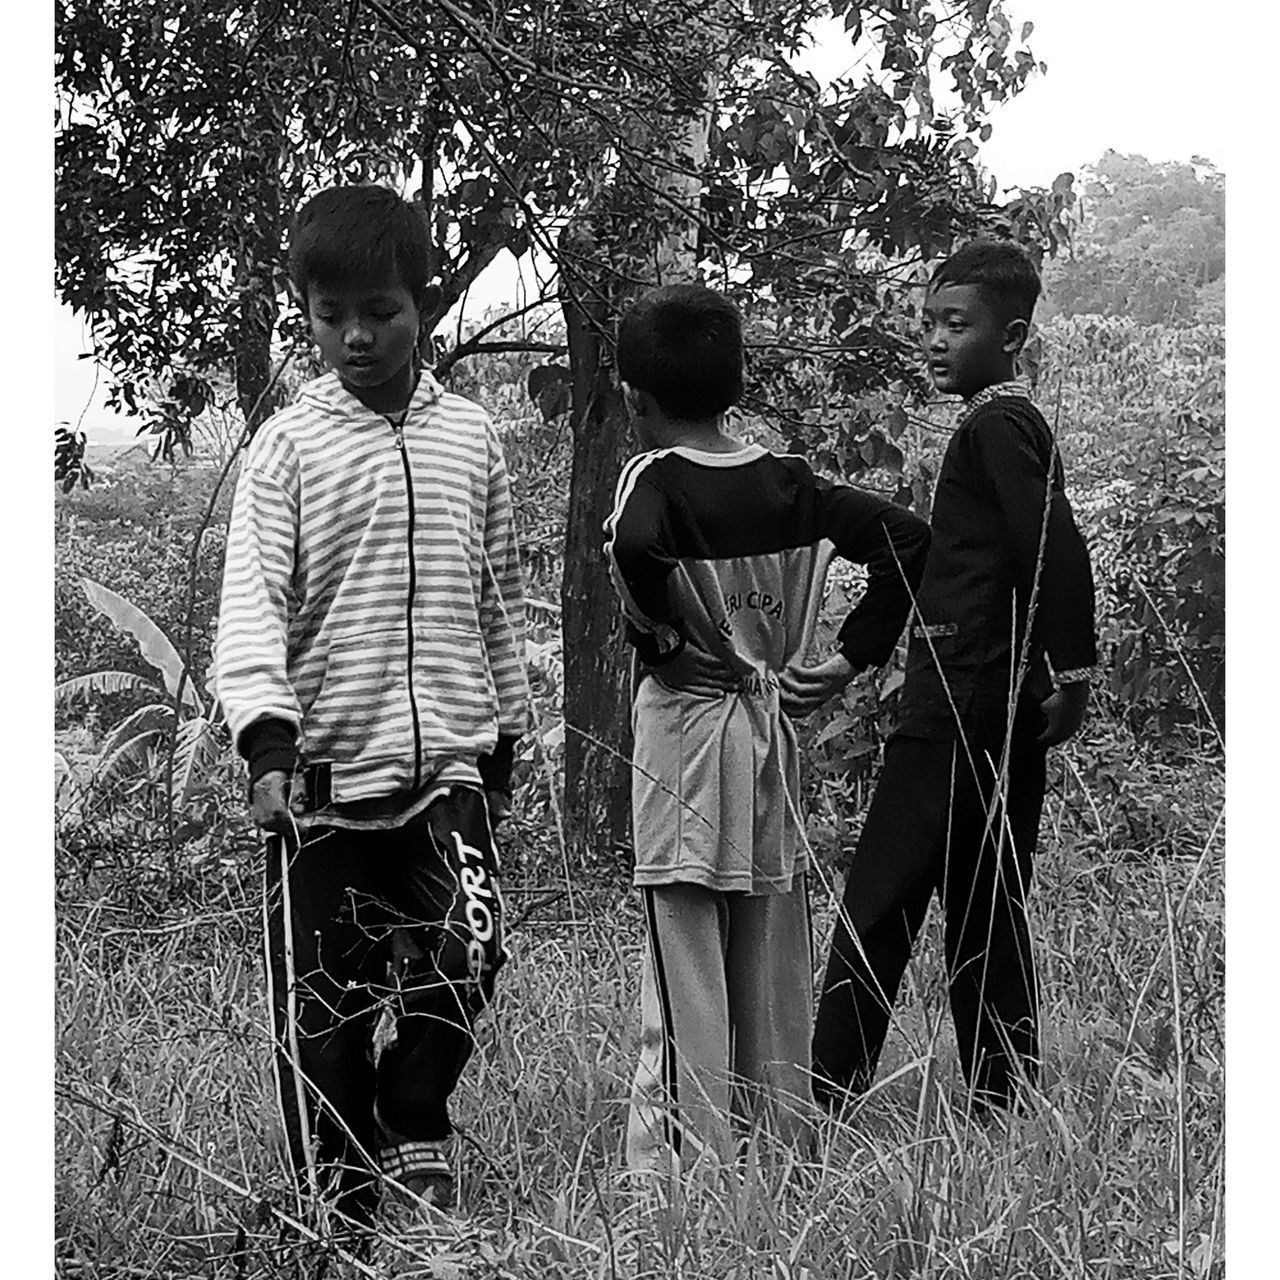 black and white, men, monochrome photography, rear view, plant, group of people, nature, monochrome, transfer print, child, day, adult, togetherness, casual clothing, auto post production filter, childhood, small group of people, lifestyles, tree, outdoors, friendship, person, leisure activity, full length, grass, women, standing, field, bonding